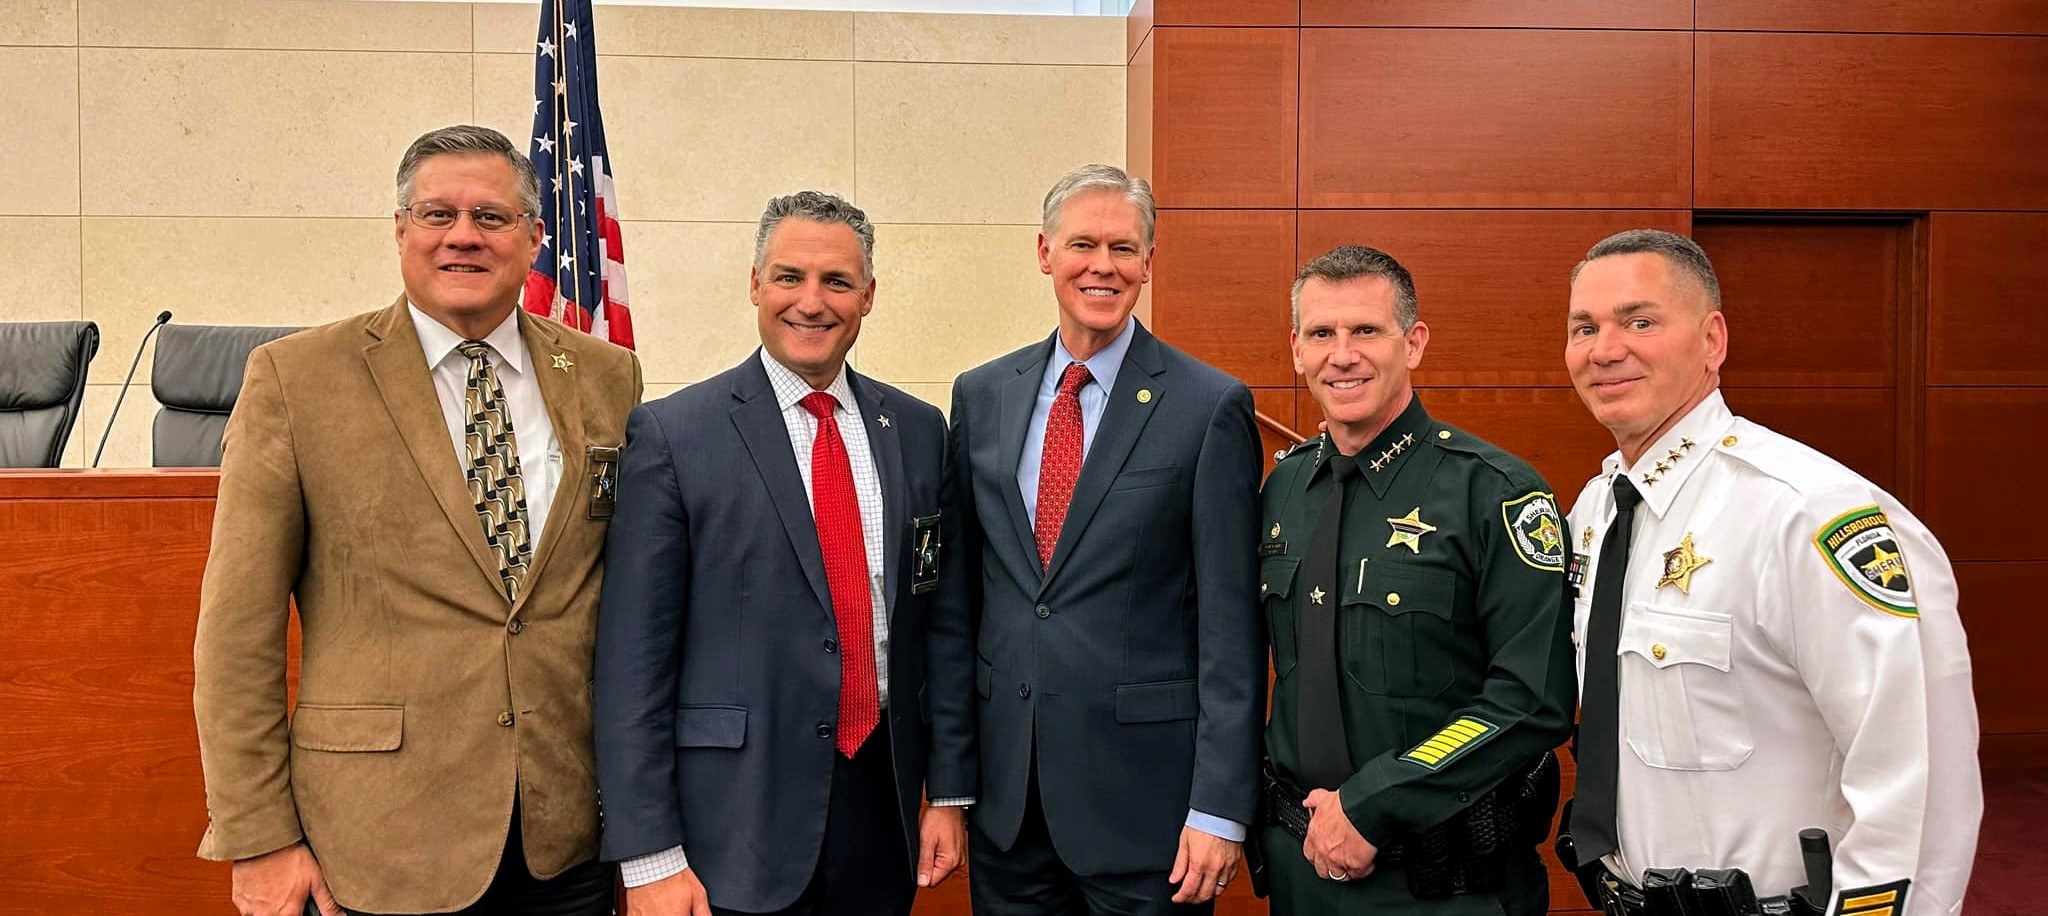 Sheriff Dennis Lemma with other politicians